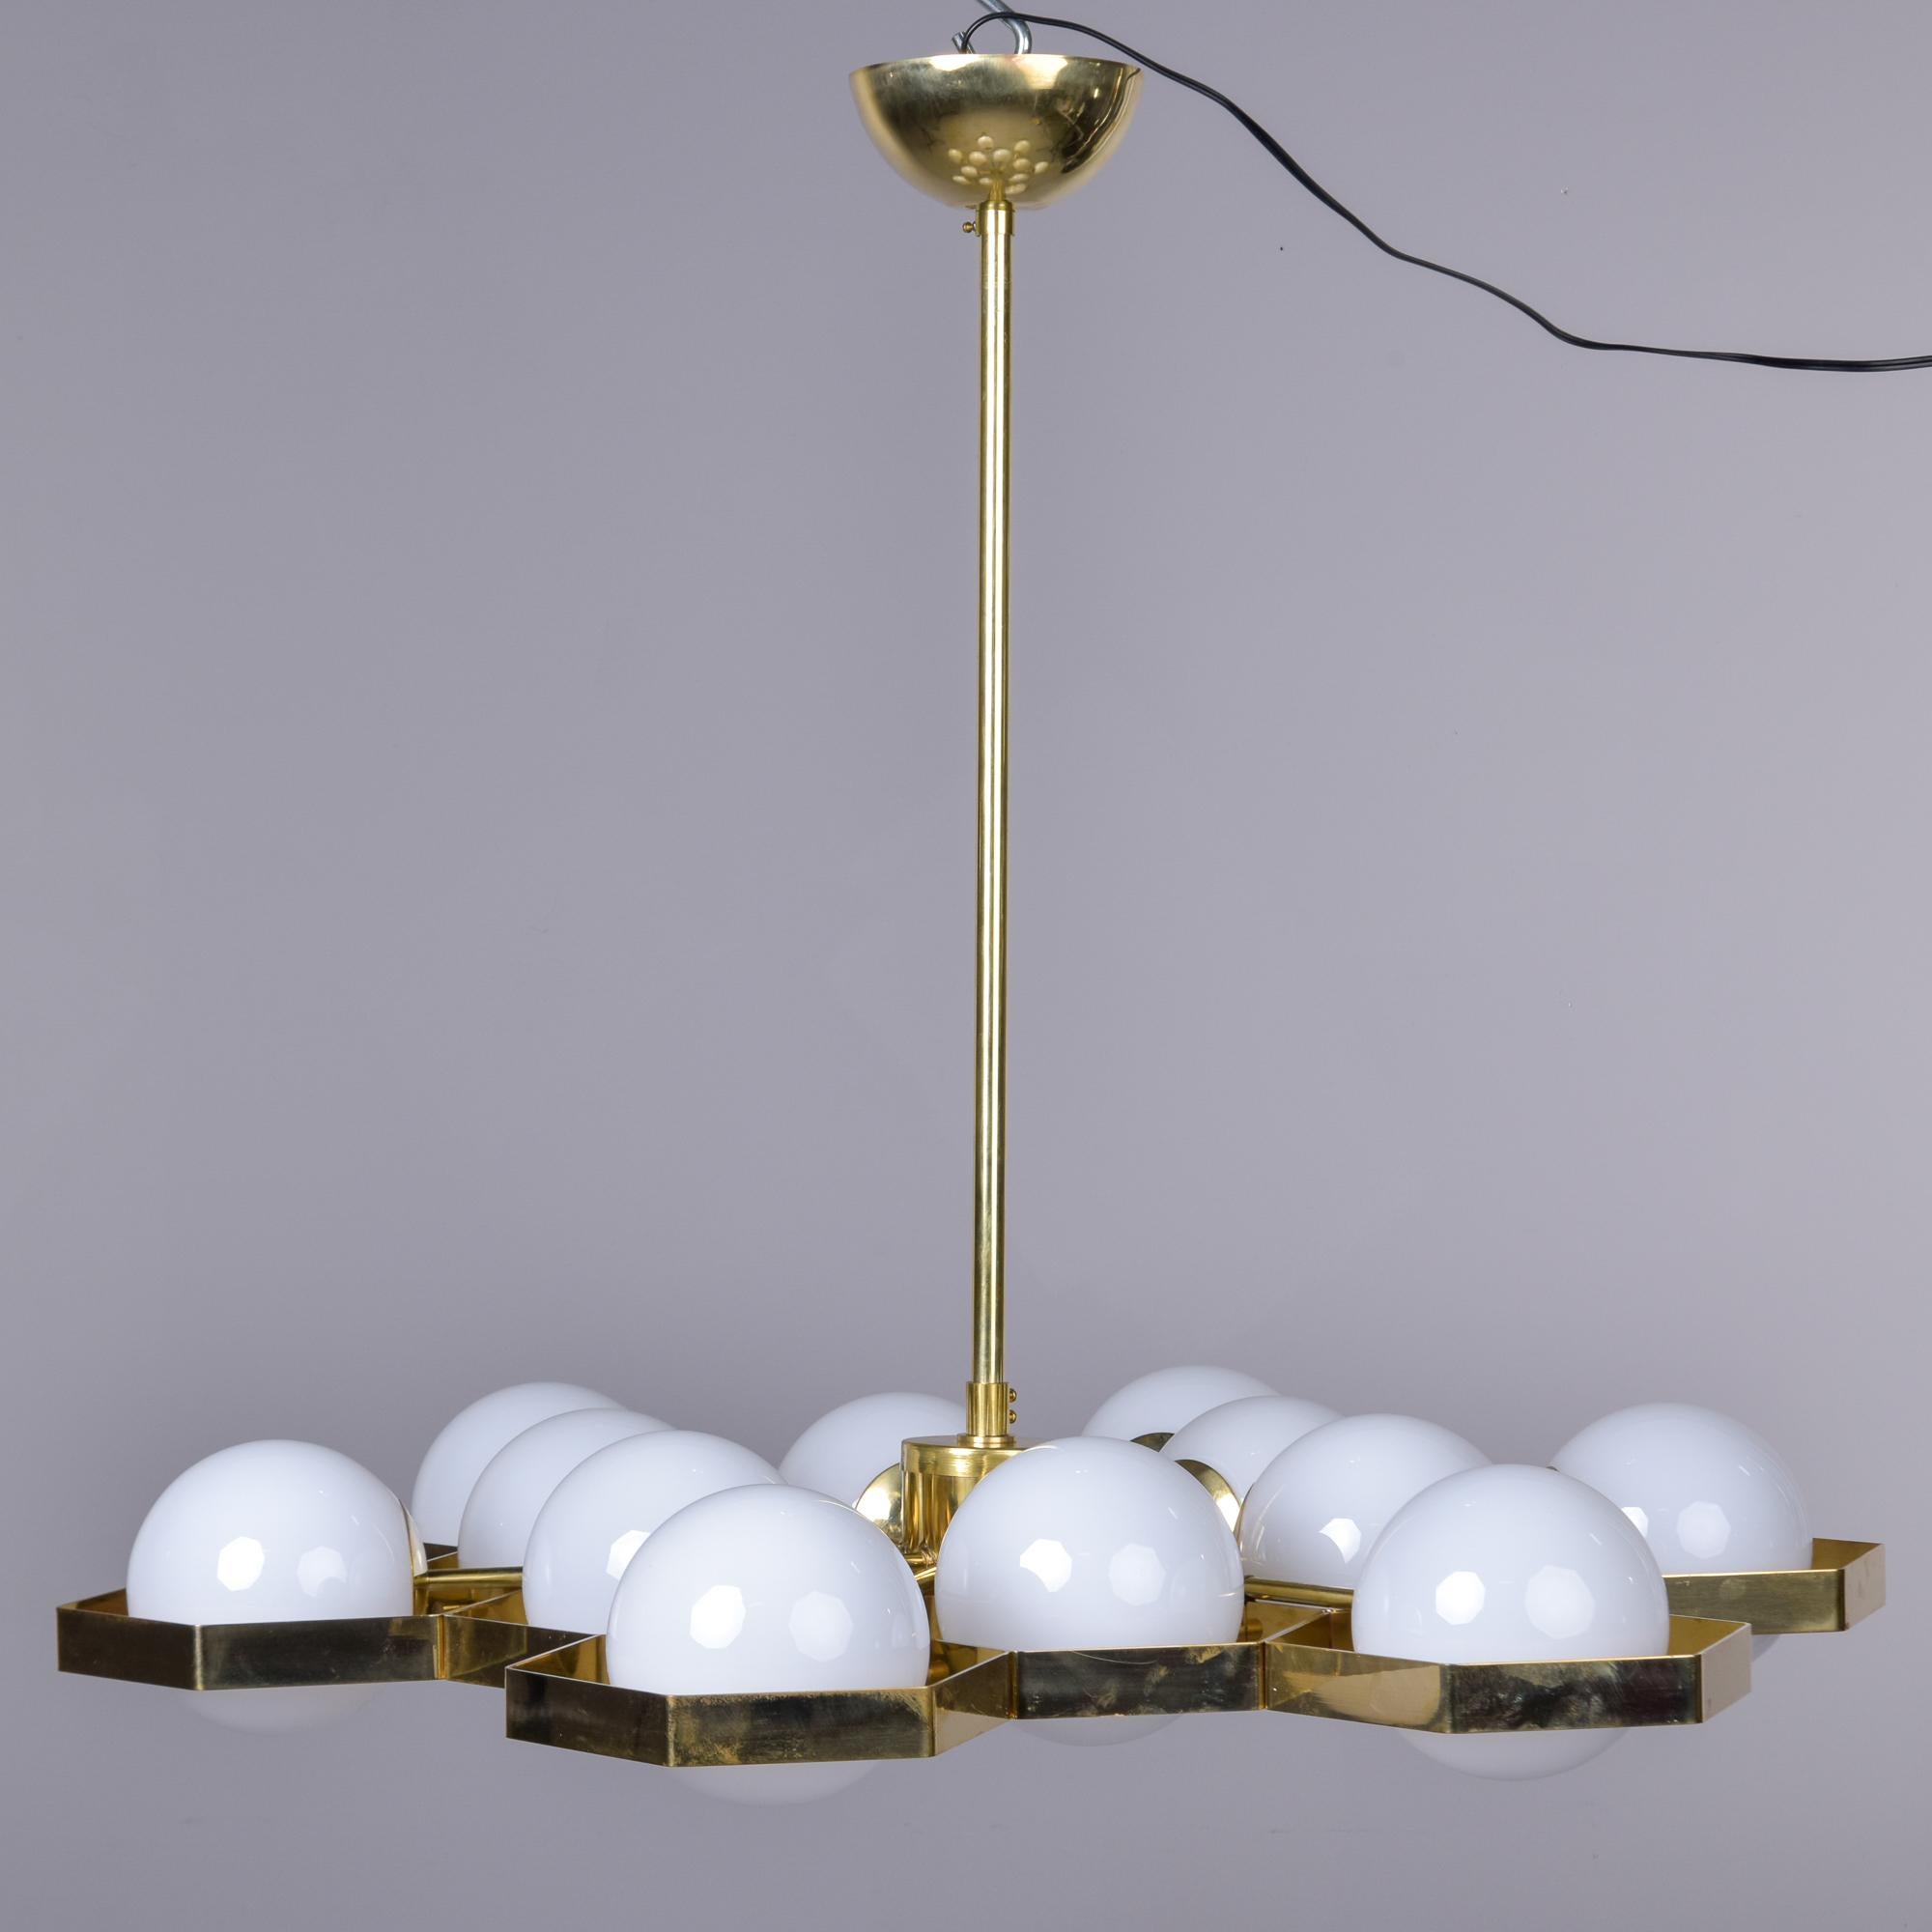 Mid-Century Modern New 12 Light Italian Fixture with Honeycomb Brass Frame and White Globes 